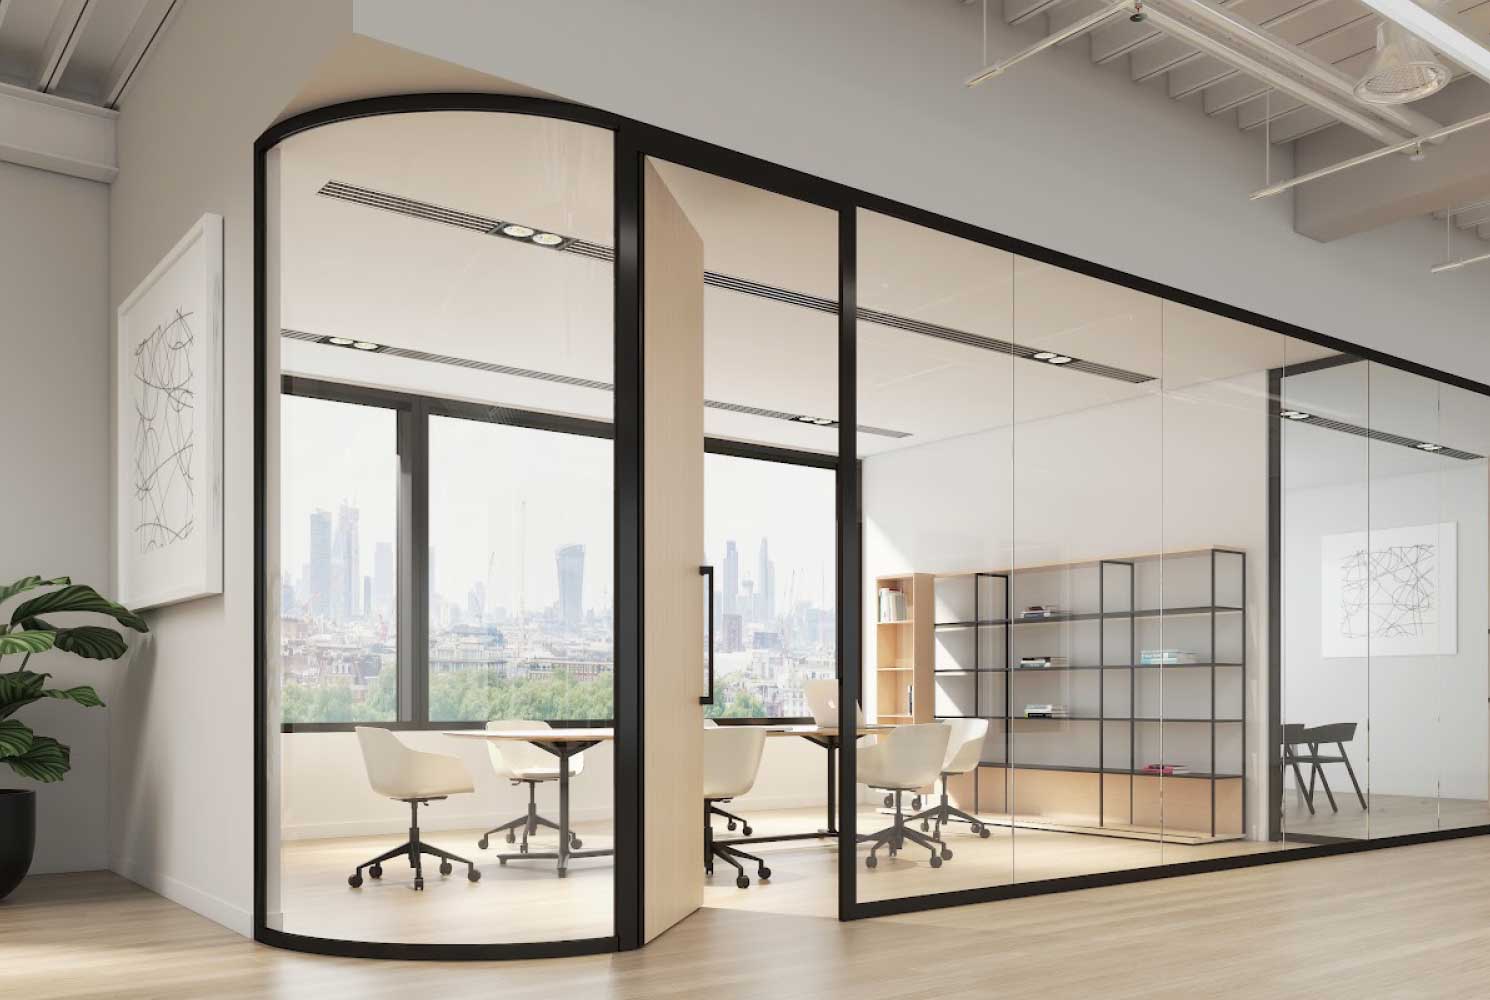 Meeting space featuring Teknion furniture and walls